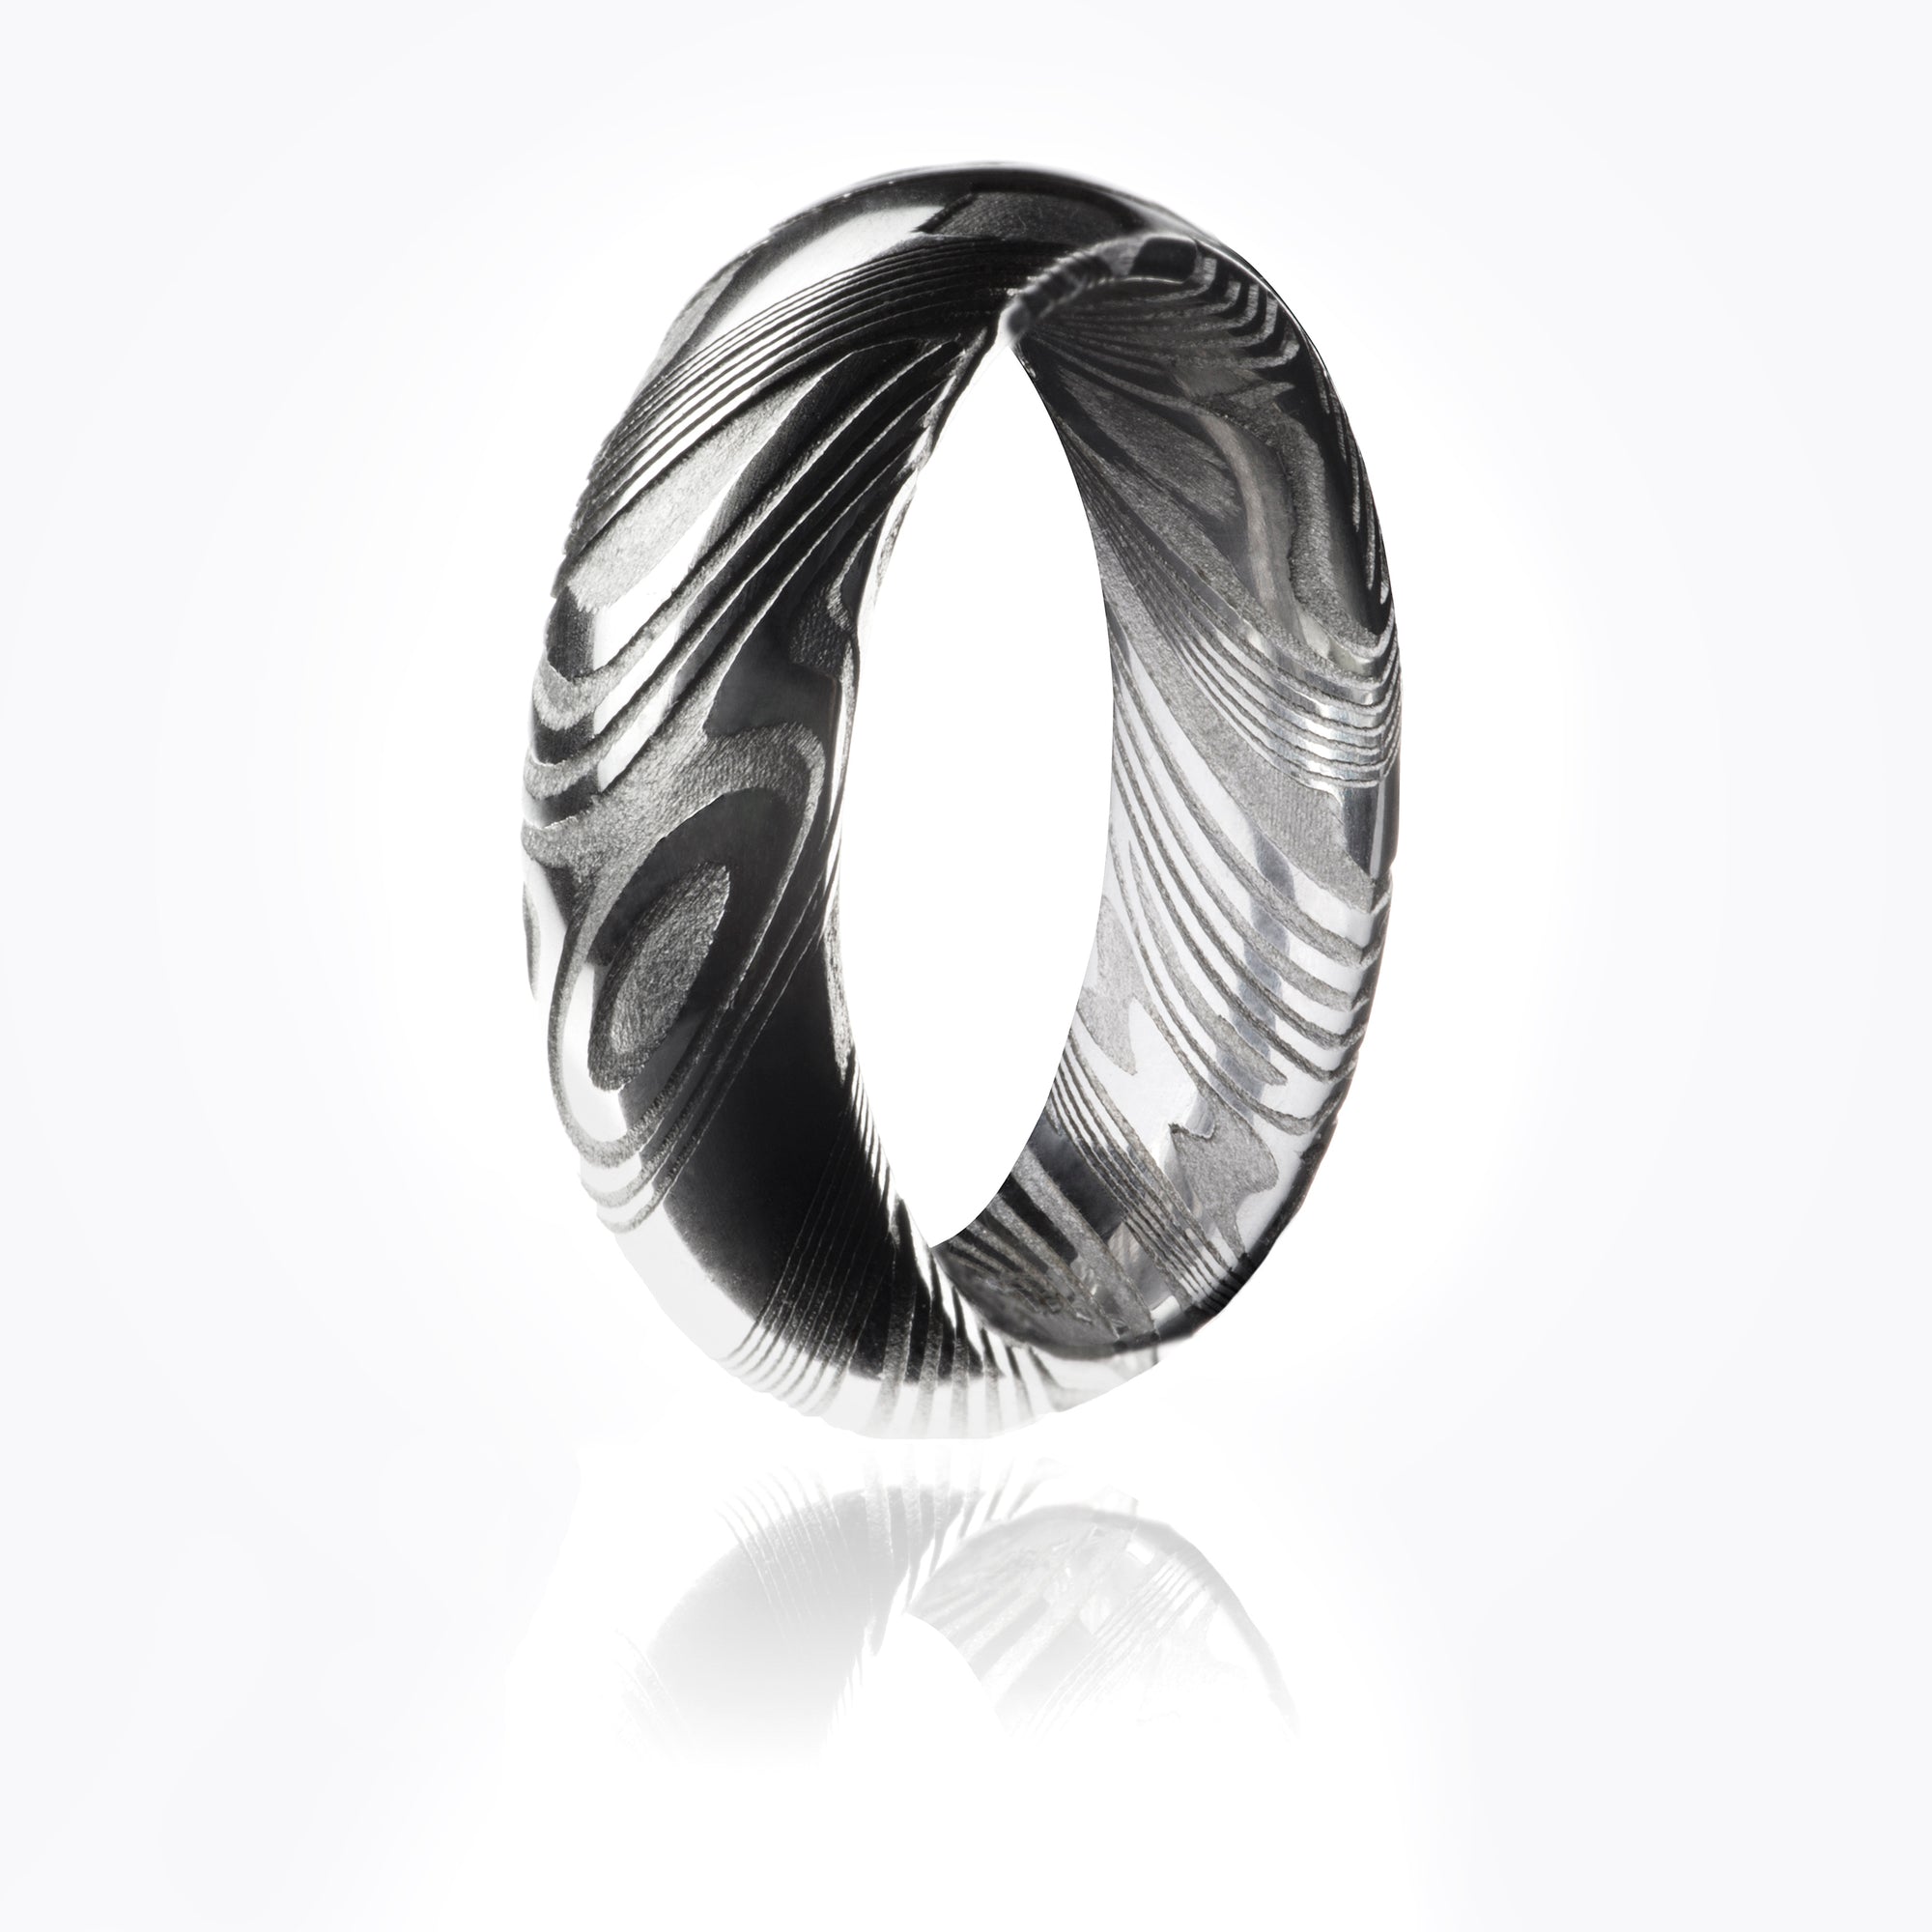 Damascus Steel radius ring with textured woodgrain pattern throughout interior and exterior. 